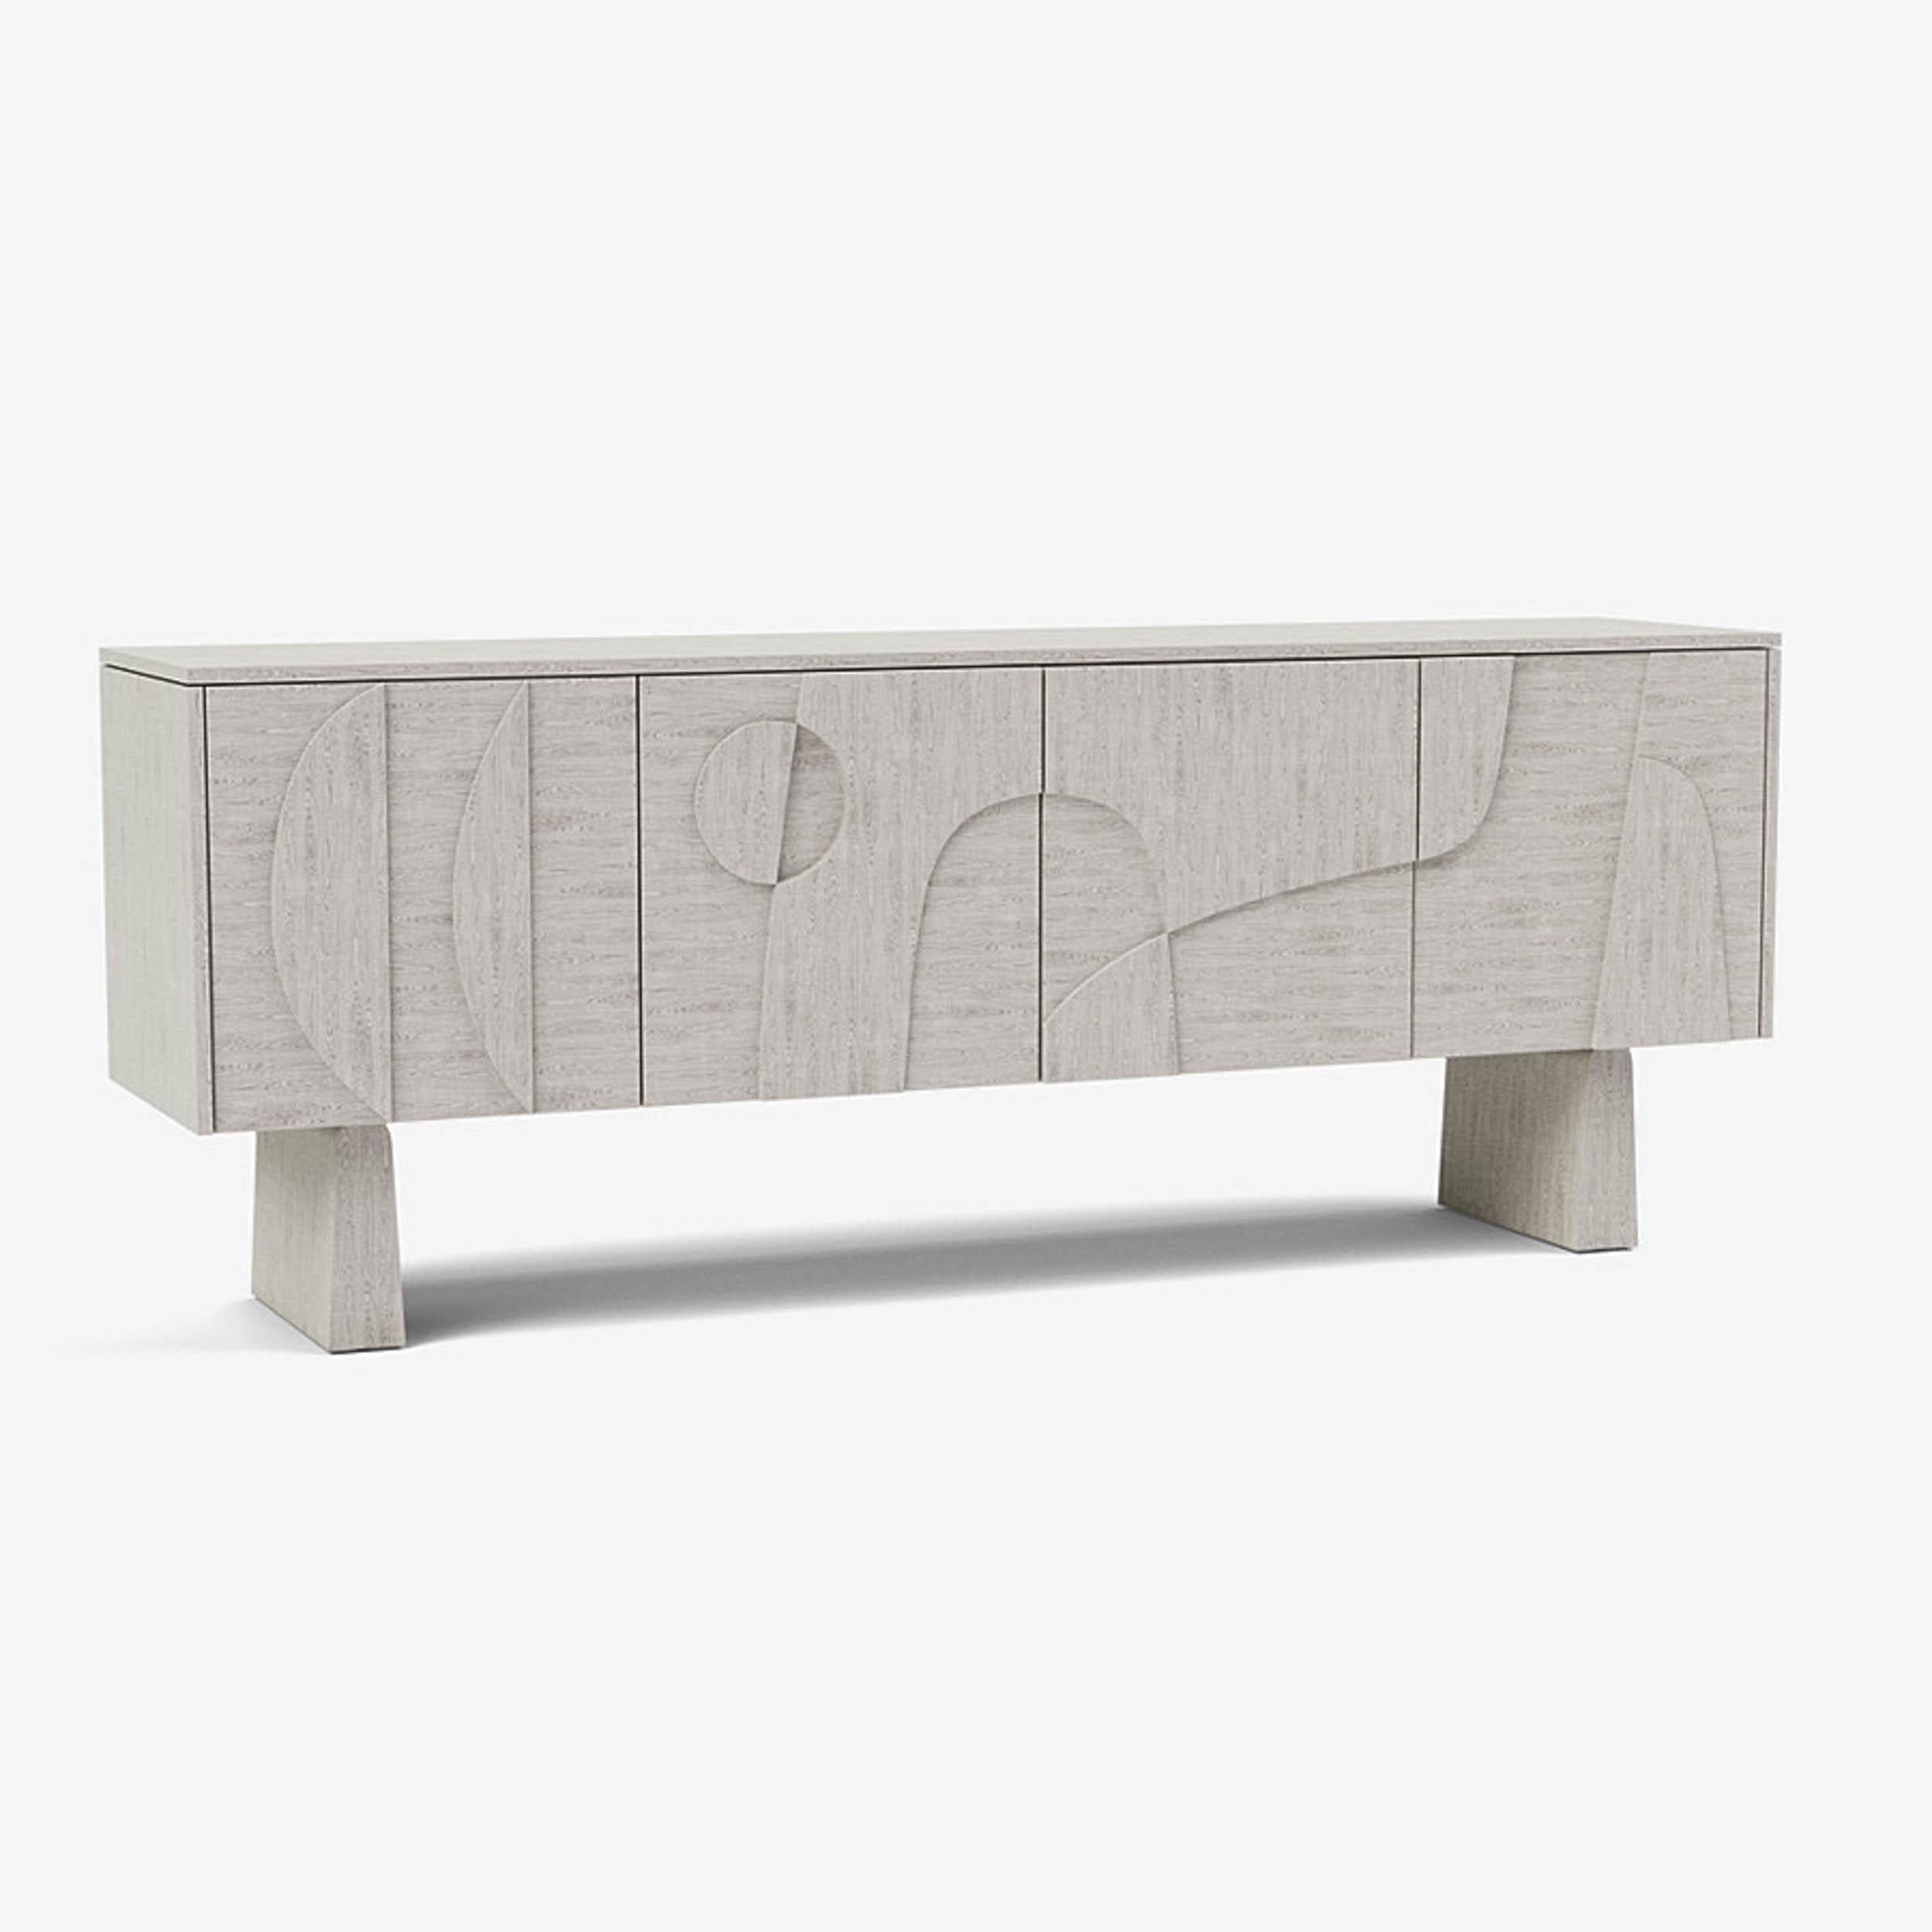 Contemporary 'Wynwood' 4 Sideboard by Man of Parts, Nude Oak, Short Legs For Sale 5